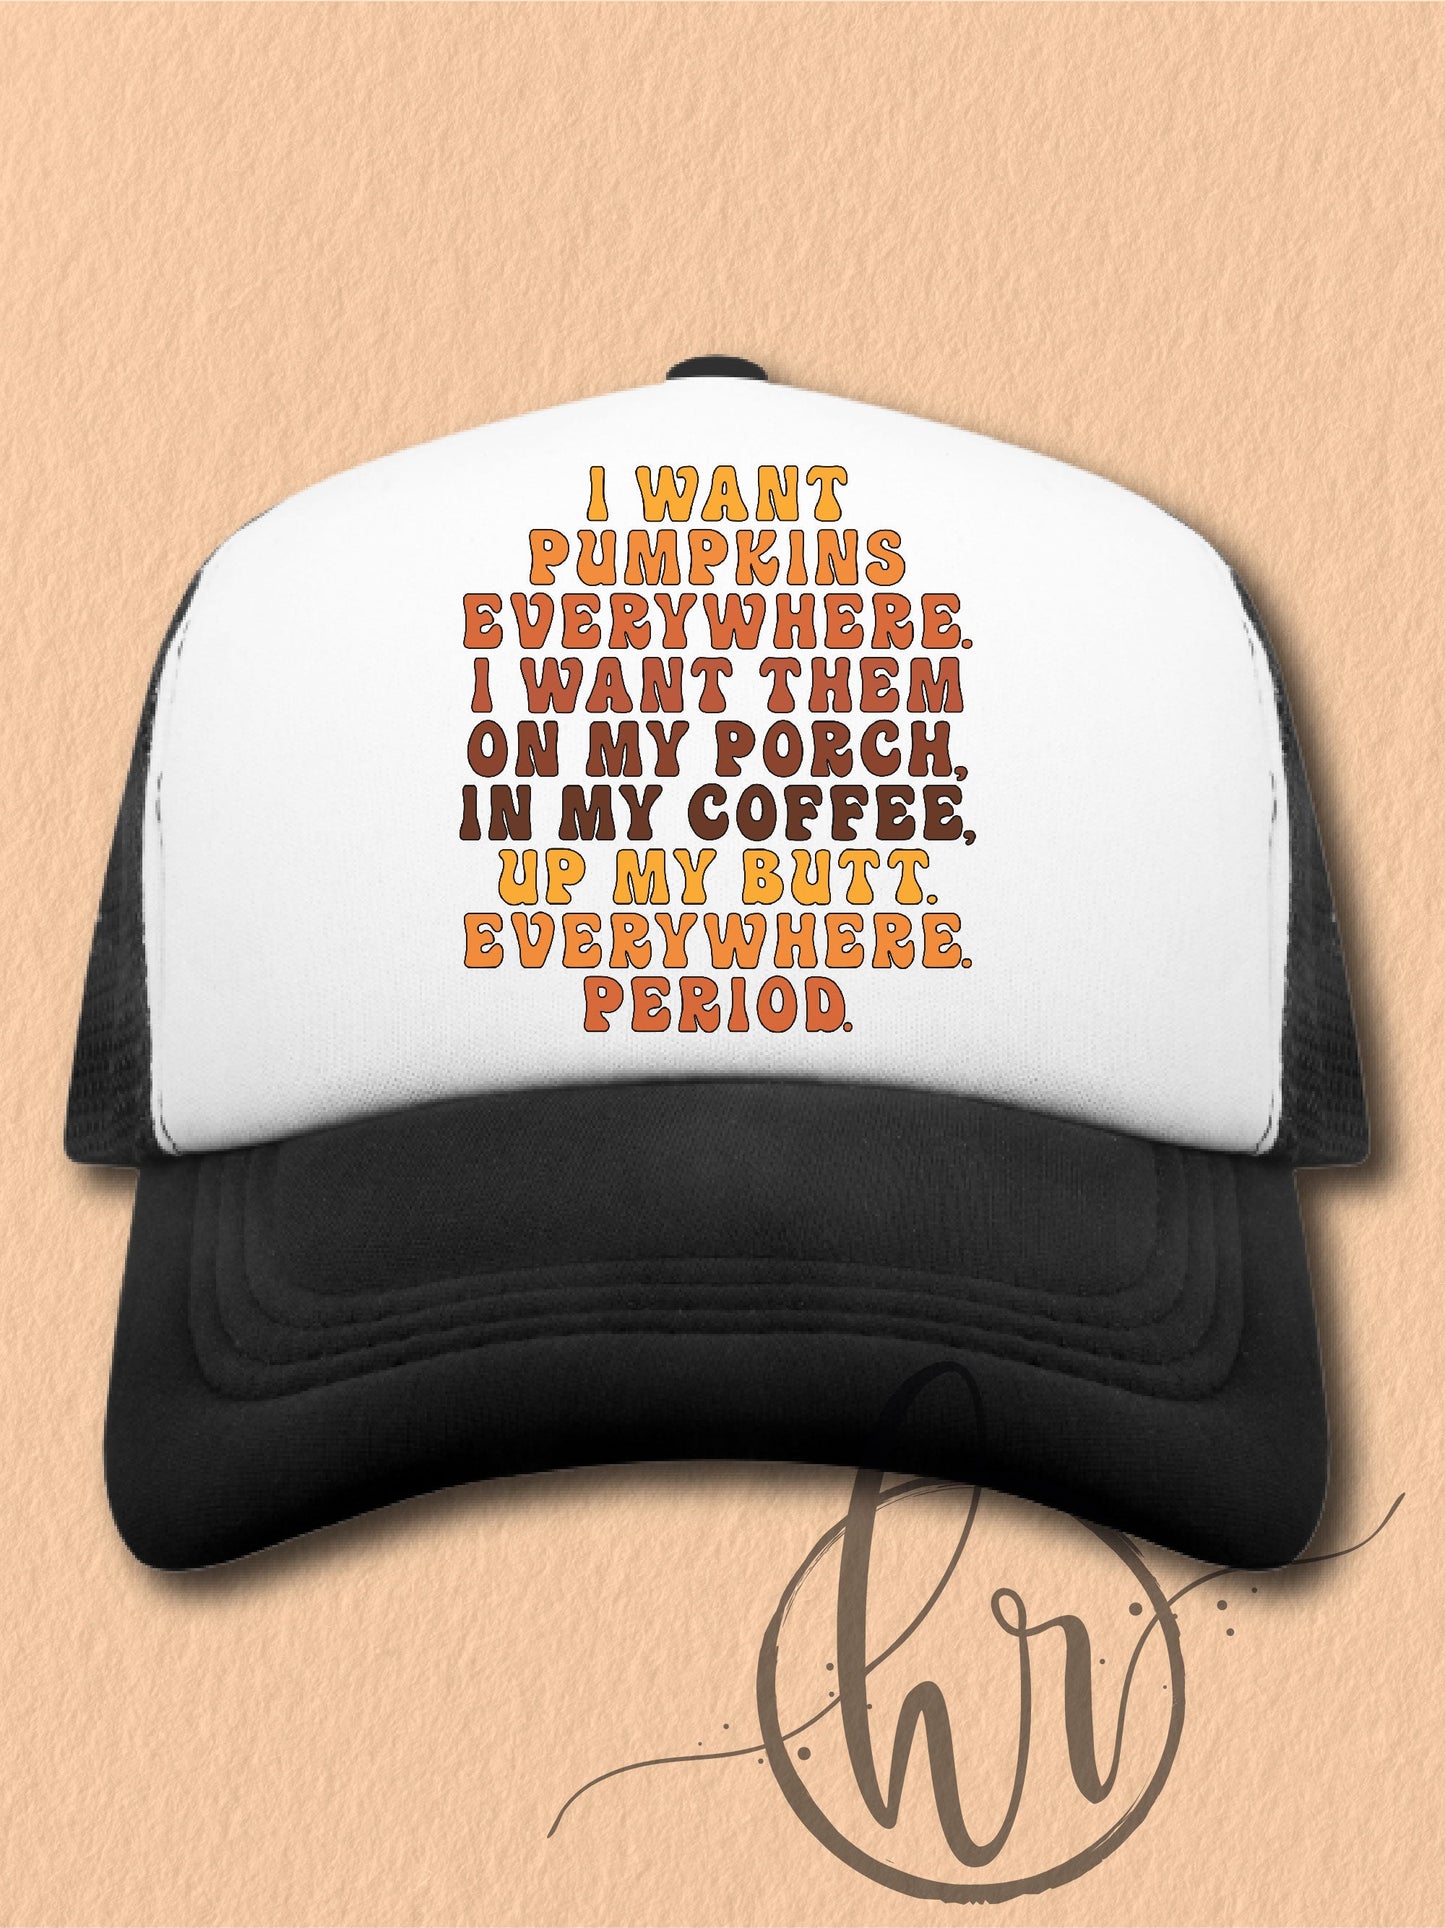 I Want Pumpkins Everywhere. I Want Them On My Porch, In My Coffee, Up My Butt. Everywhere. Period. - (Hat)